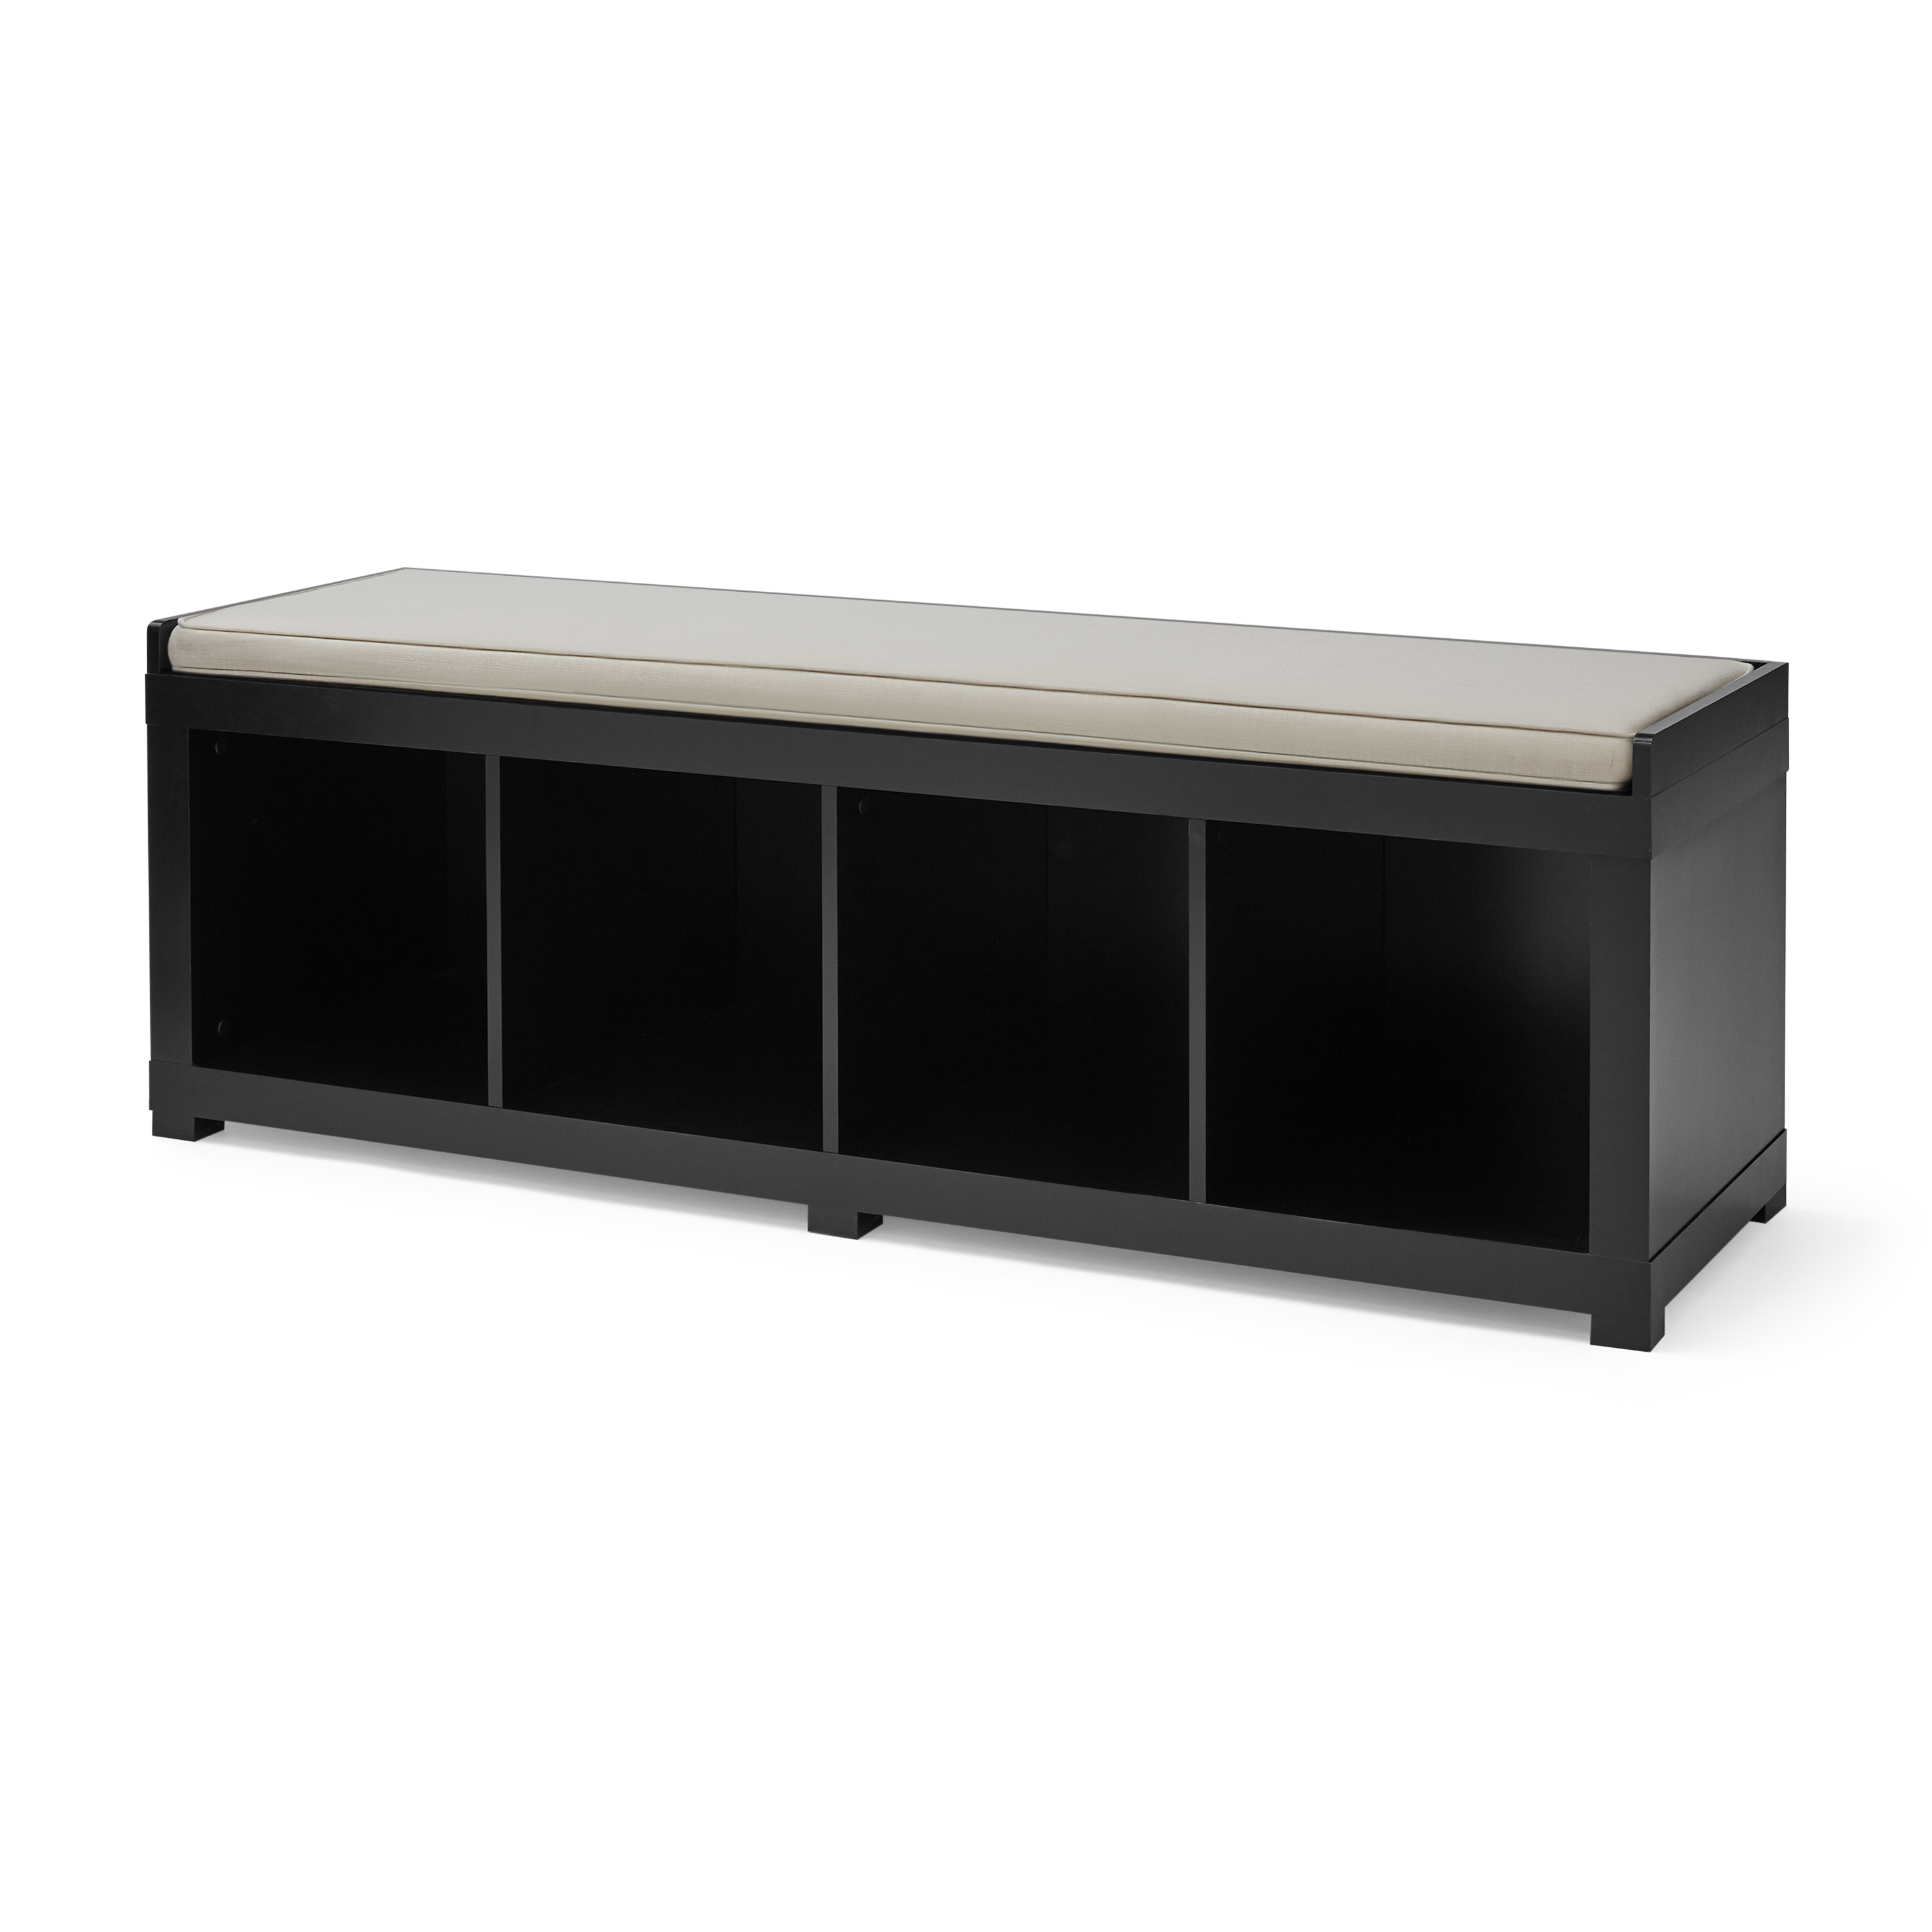 Better Homes & Gardens 4-Cube Shoe Storage Bench, Black - image 2 of 7